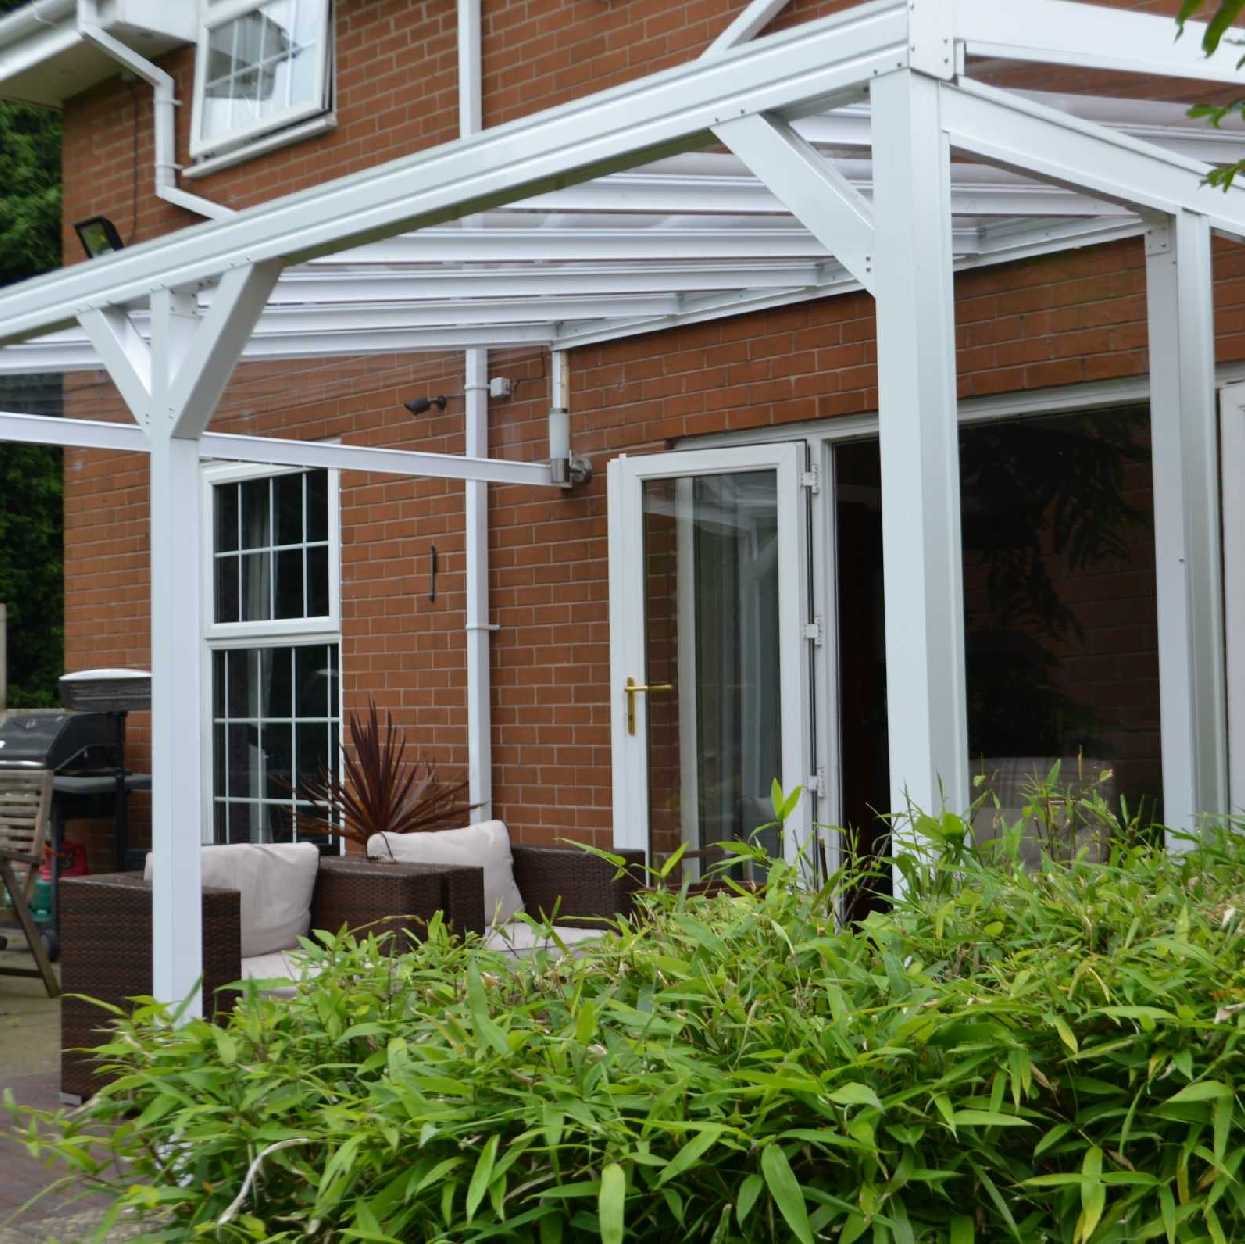 Omega Smart Lean-To Canopy, White UNGLAZED for 6mm Glazing - 5.6m (W) x 1.5m (P), (3) Supporting Posts from Omega Build